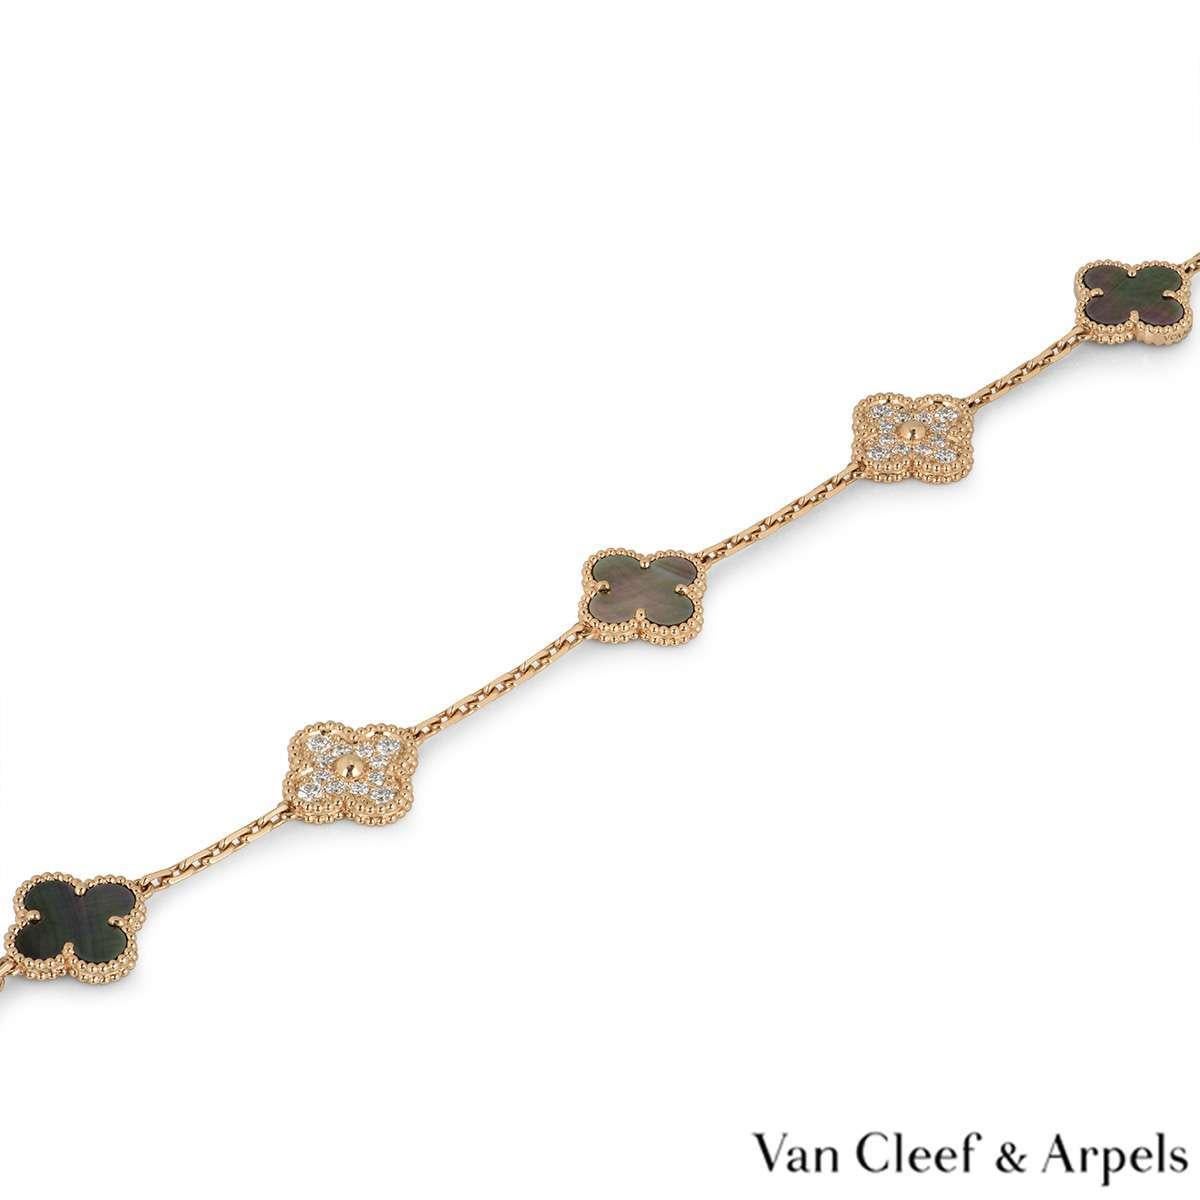 An 18k rose gold bracelet from the Vintage Alhambra collection by Van Cleef and Arpels. The bracelet is made up of 5 iconic clover motifs, three are set with grey mother of pearl and two are set with round brilliant cut diamonds totalling 0.96ct.